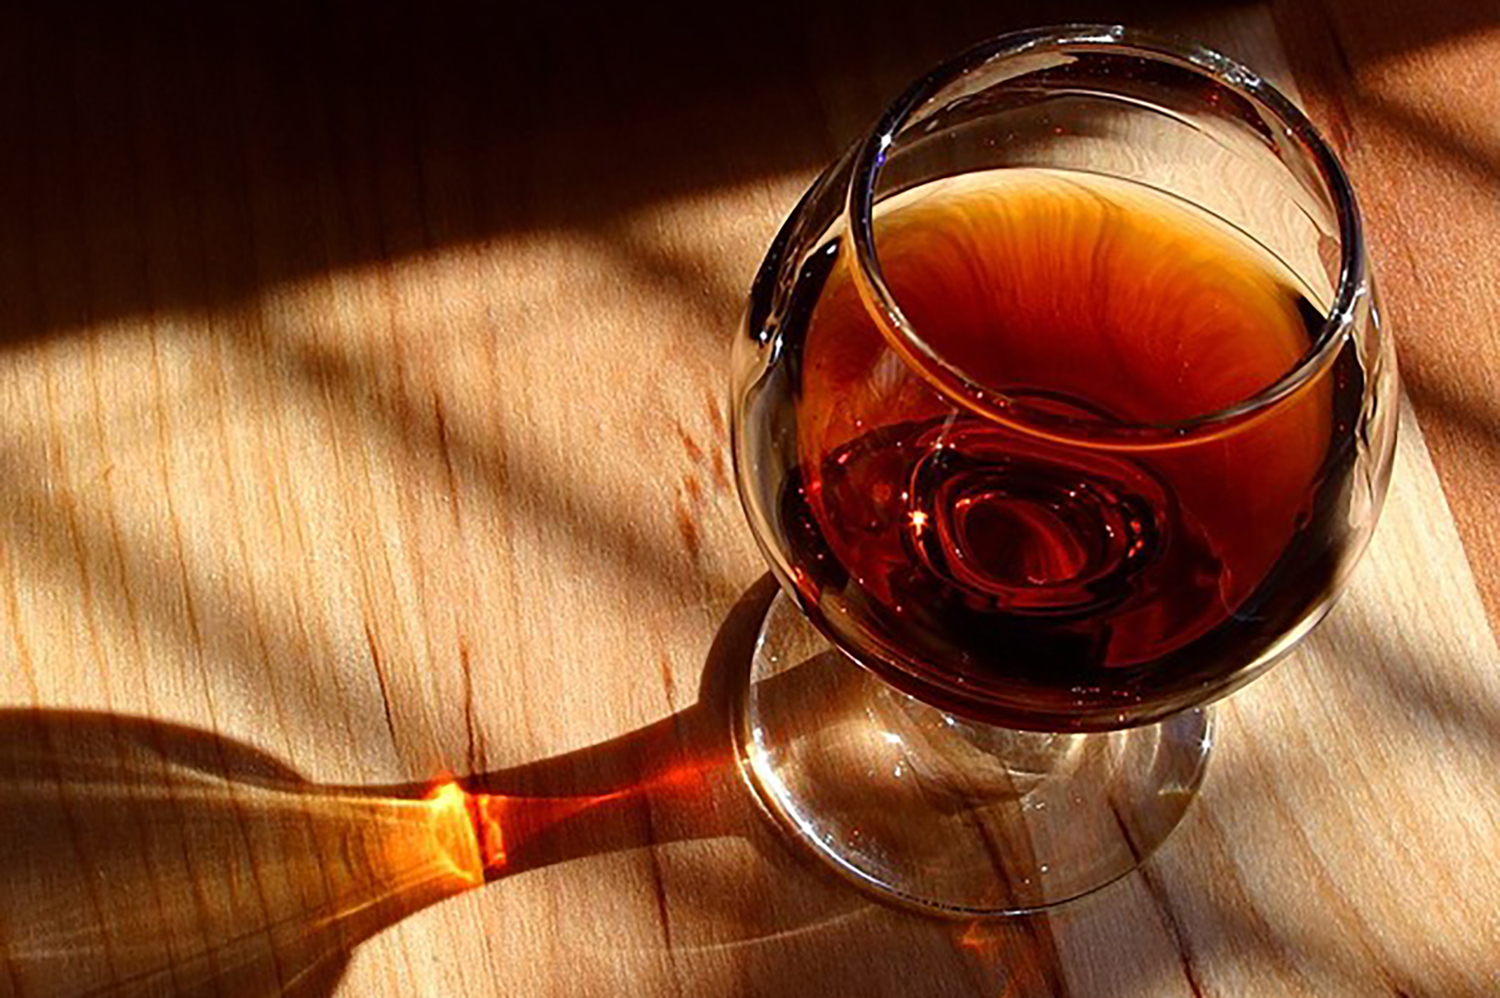 A glass of Cognac served on a wooden table.